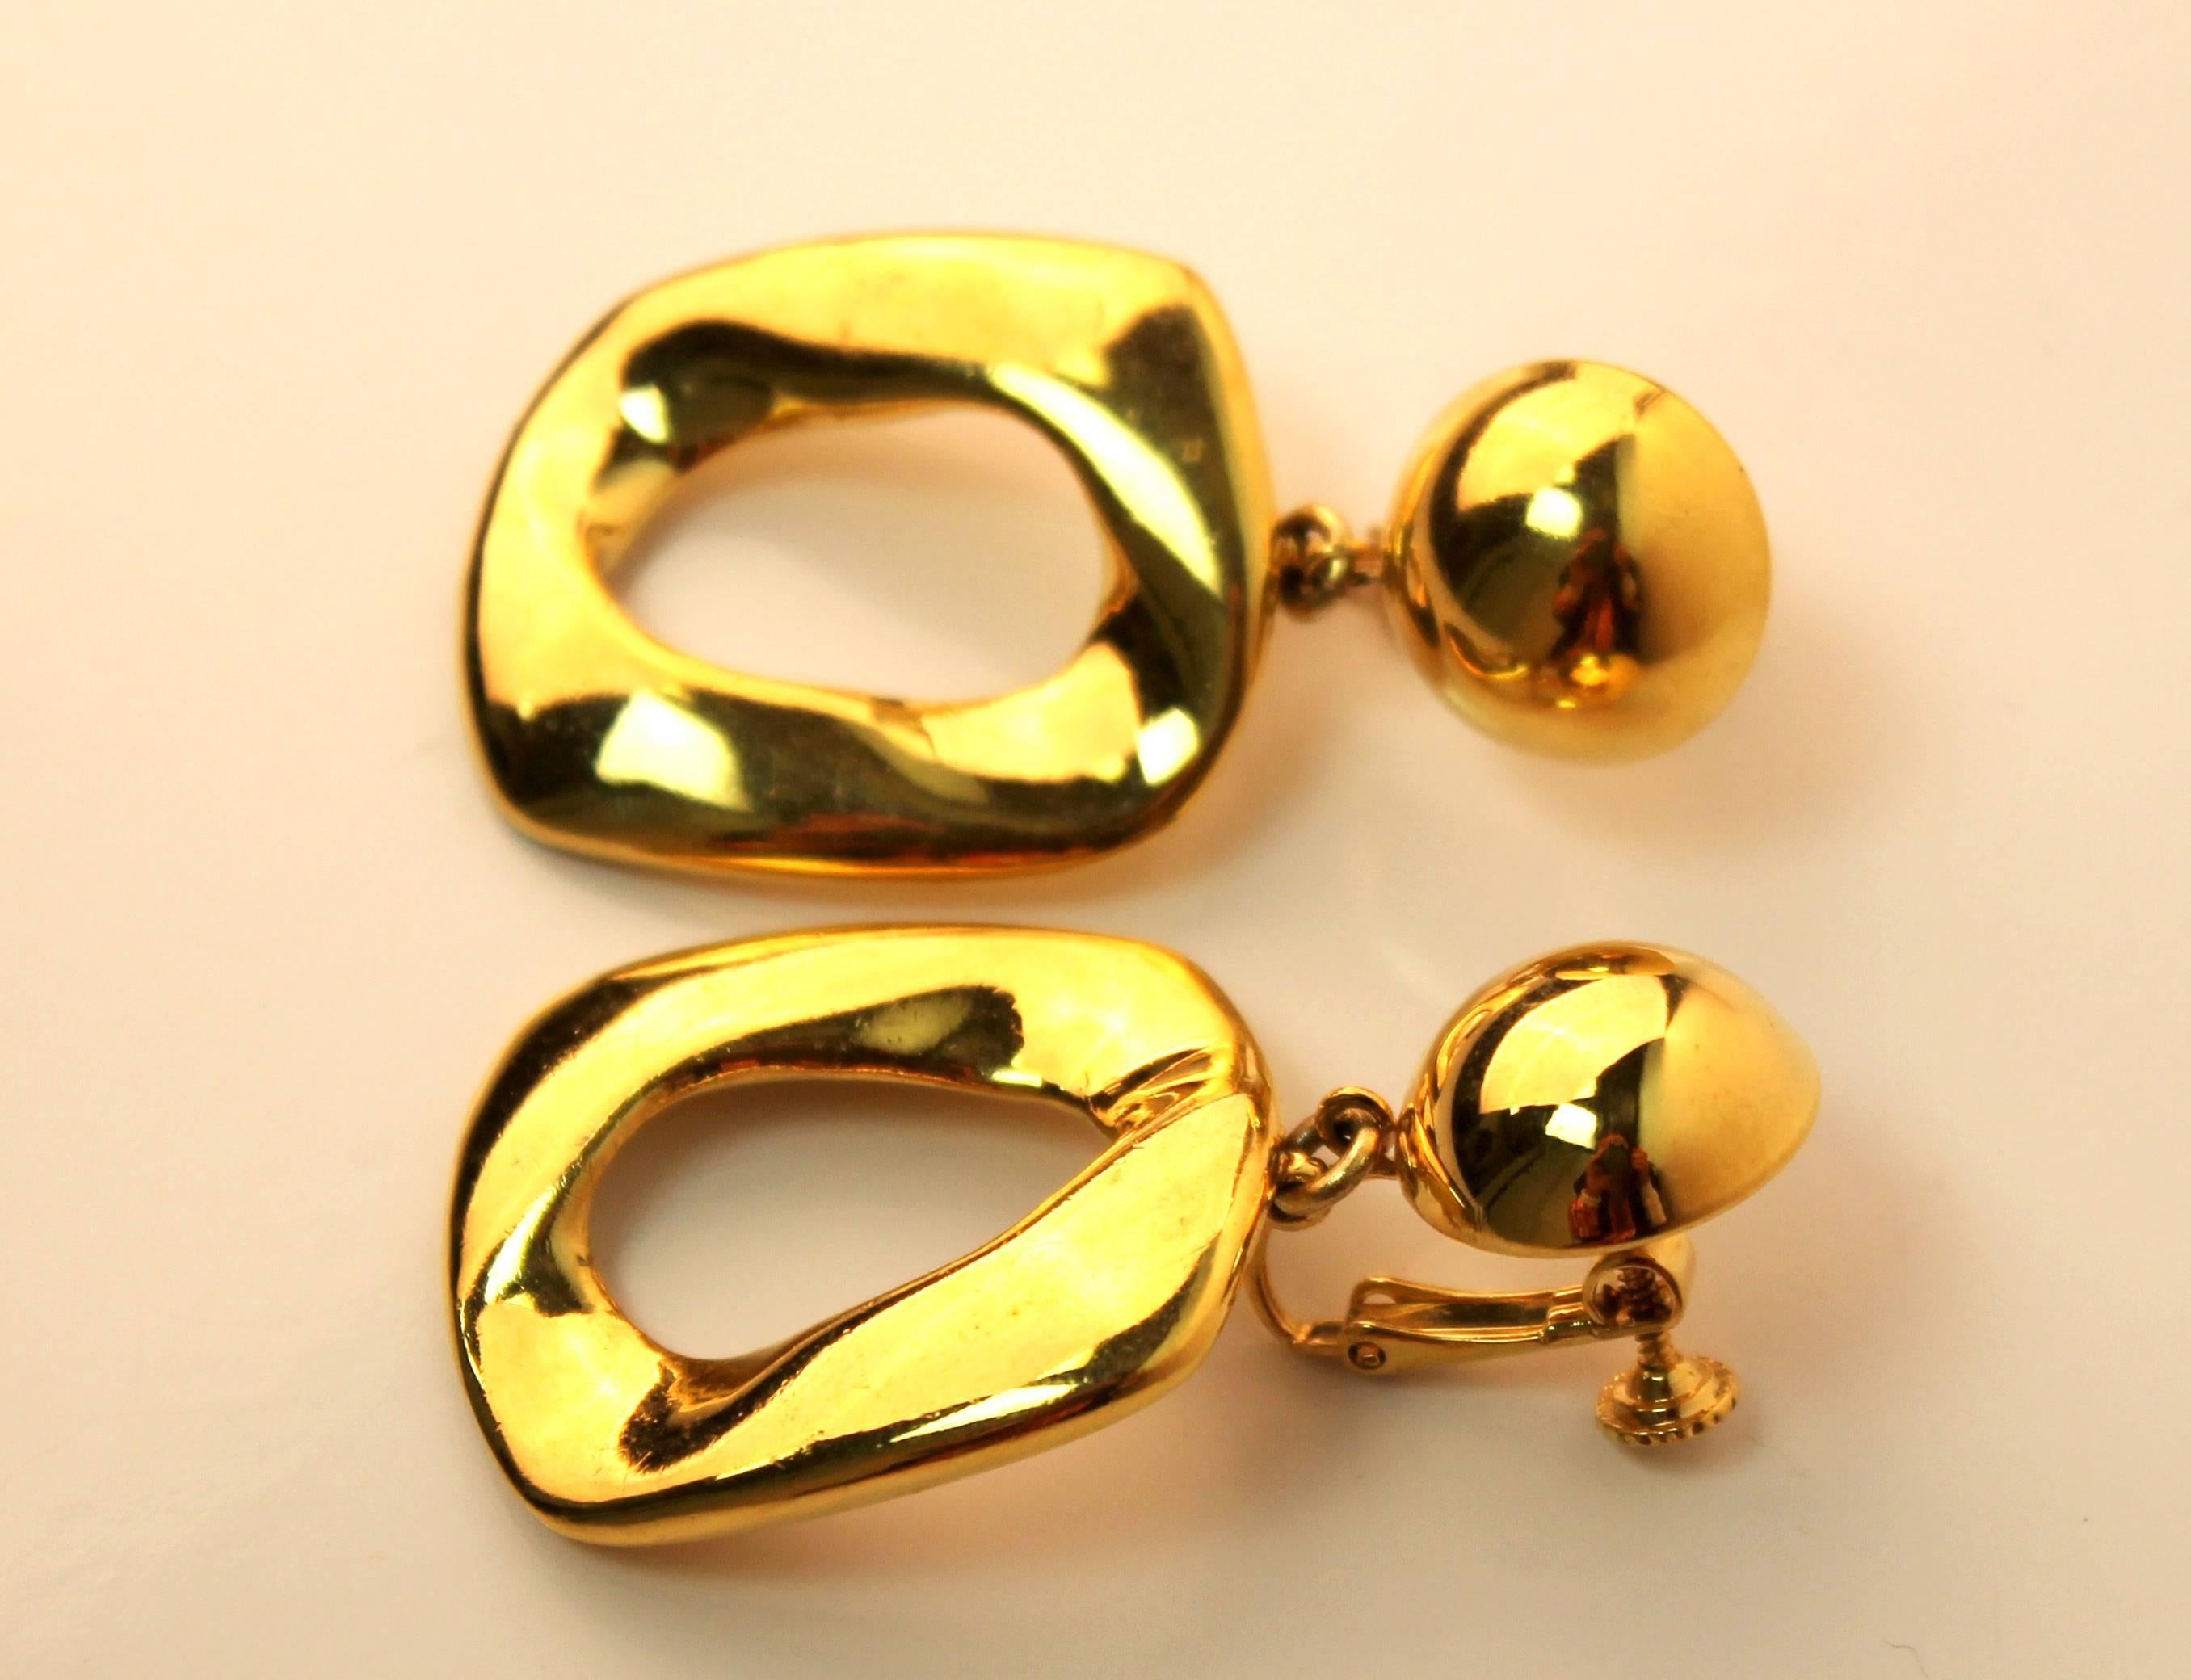 Classic vintage gold-plated earrings from Yves Saint Laurent. Features a round distorted square shape hanging from a convex circle. Has a twist clip closure.